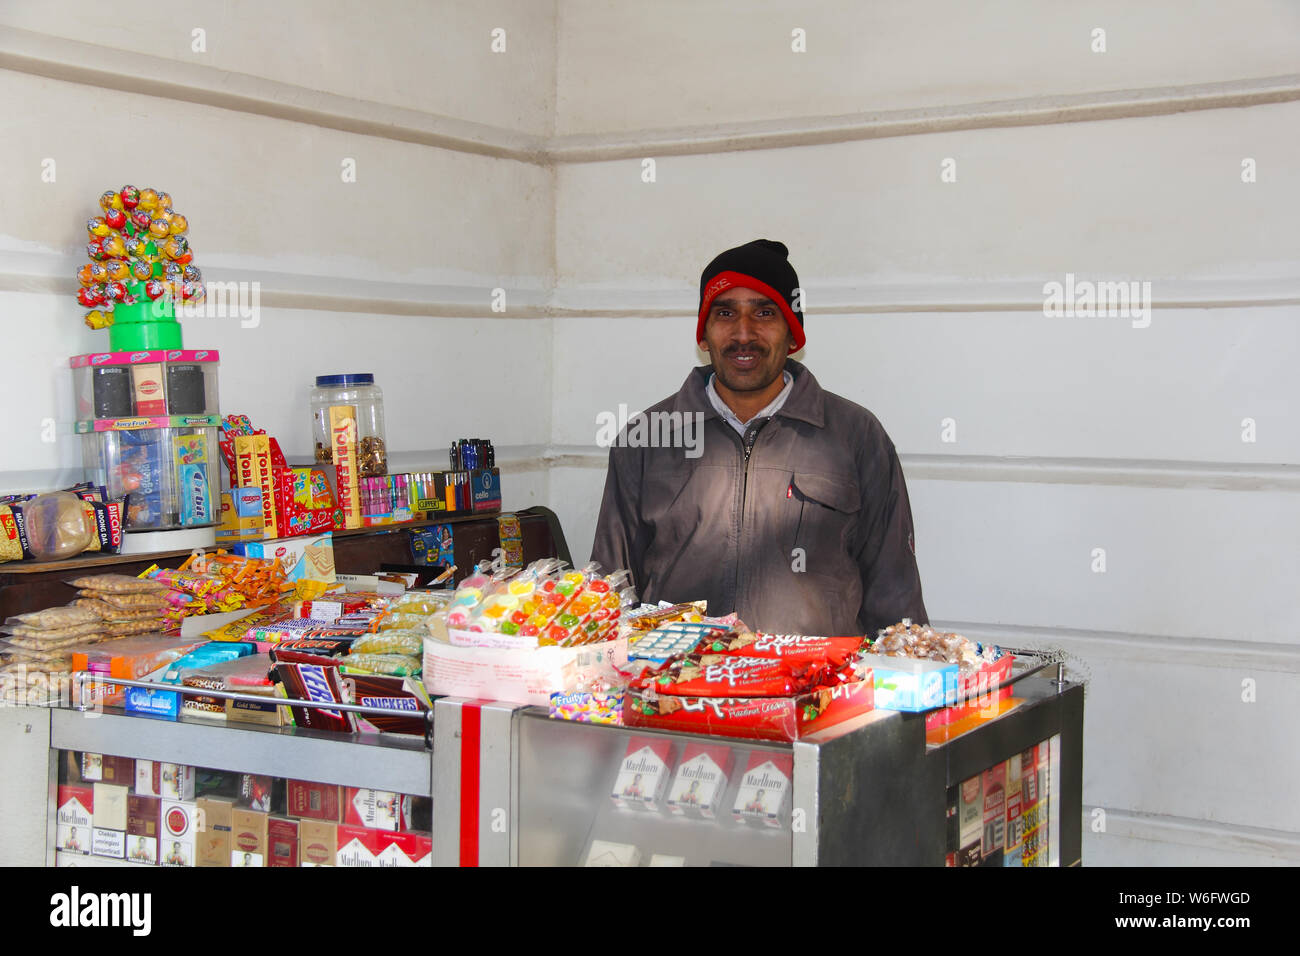 Shopkeeper in a shop Stock Photo